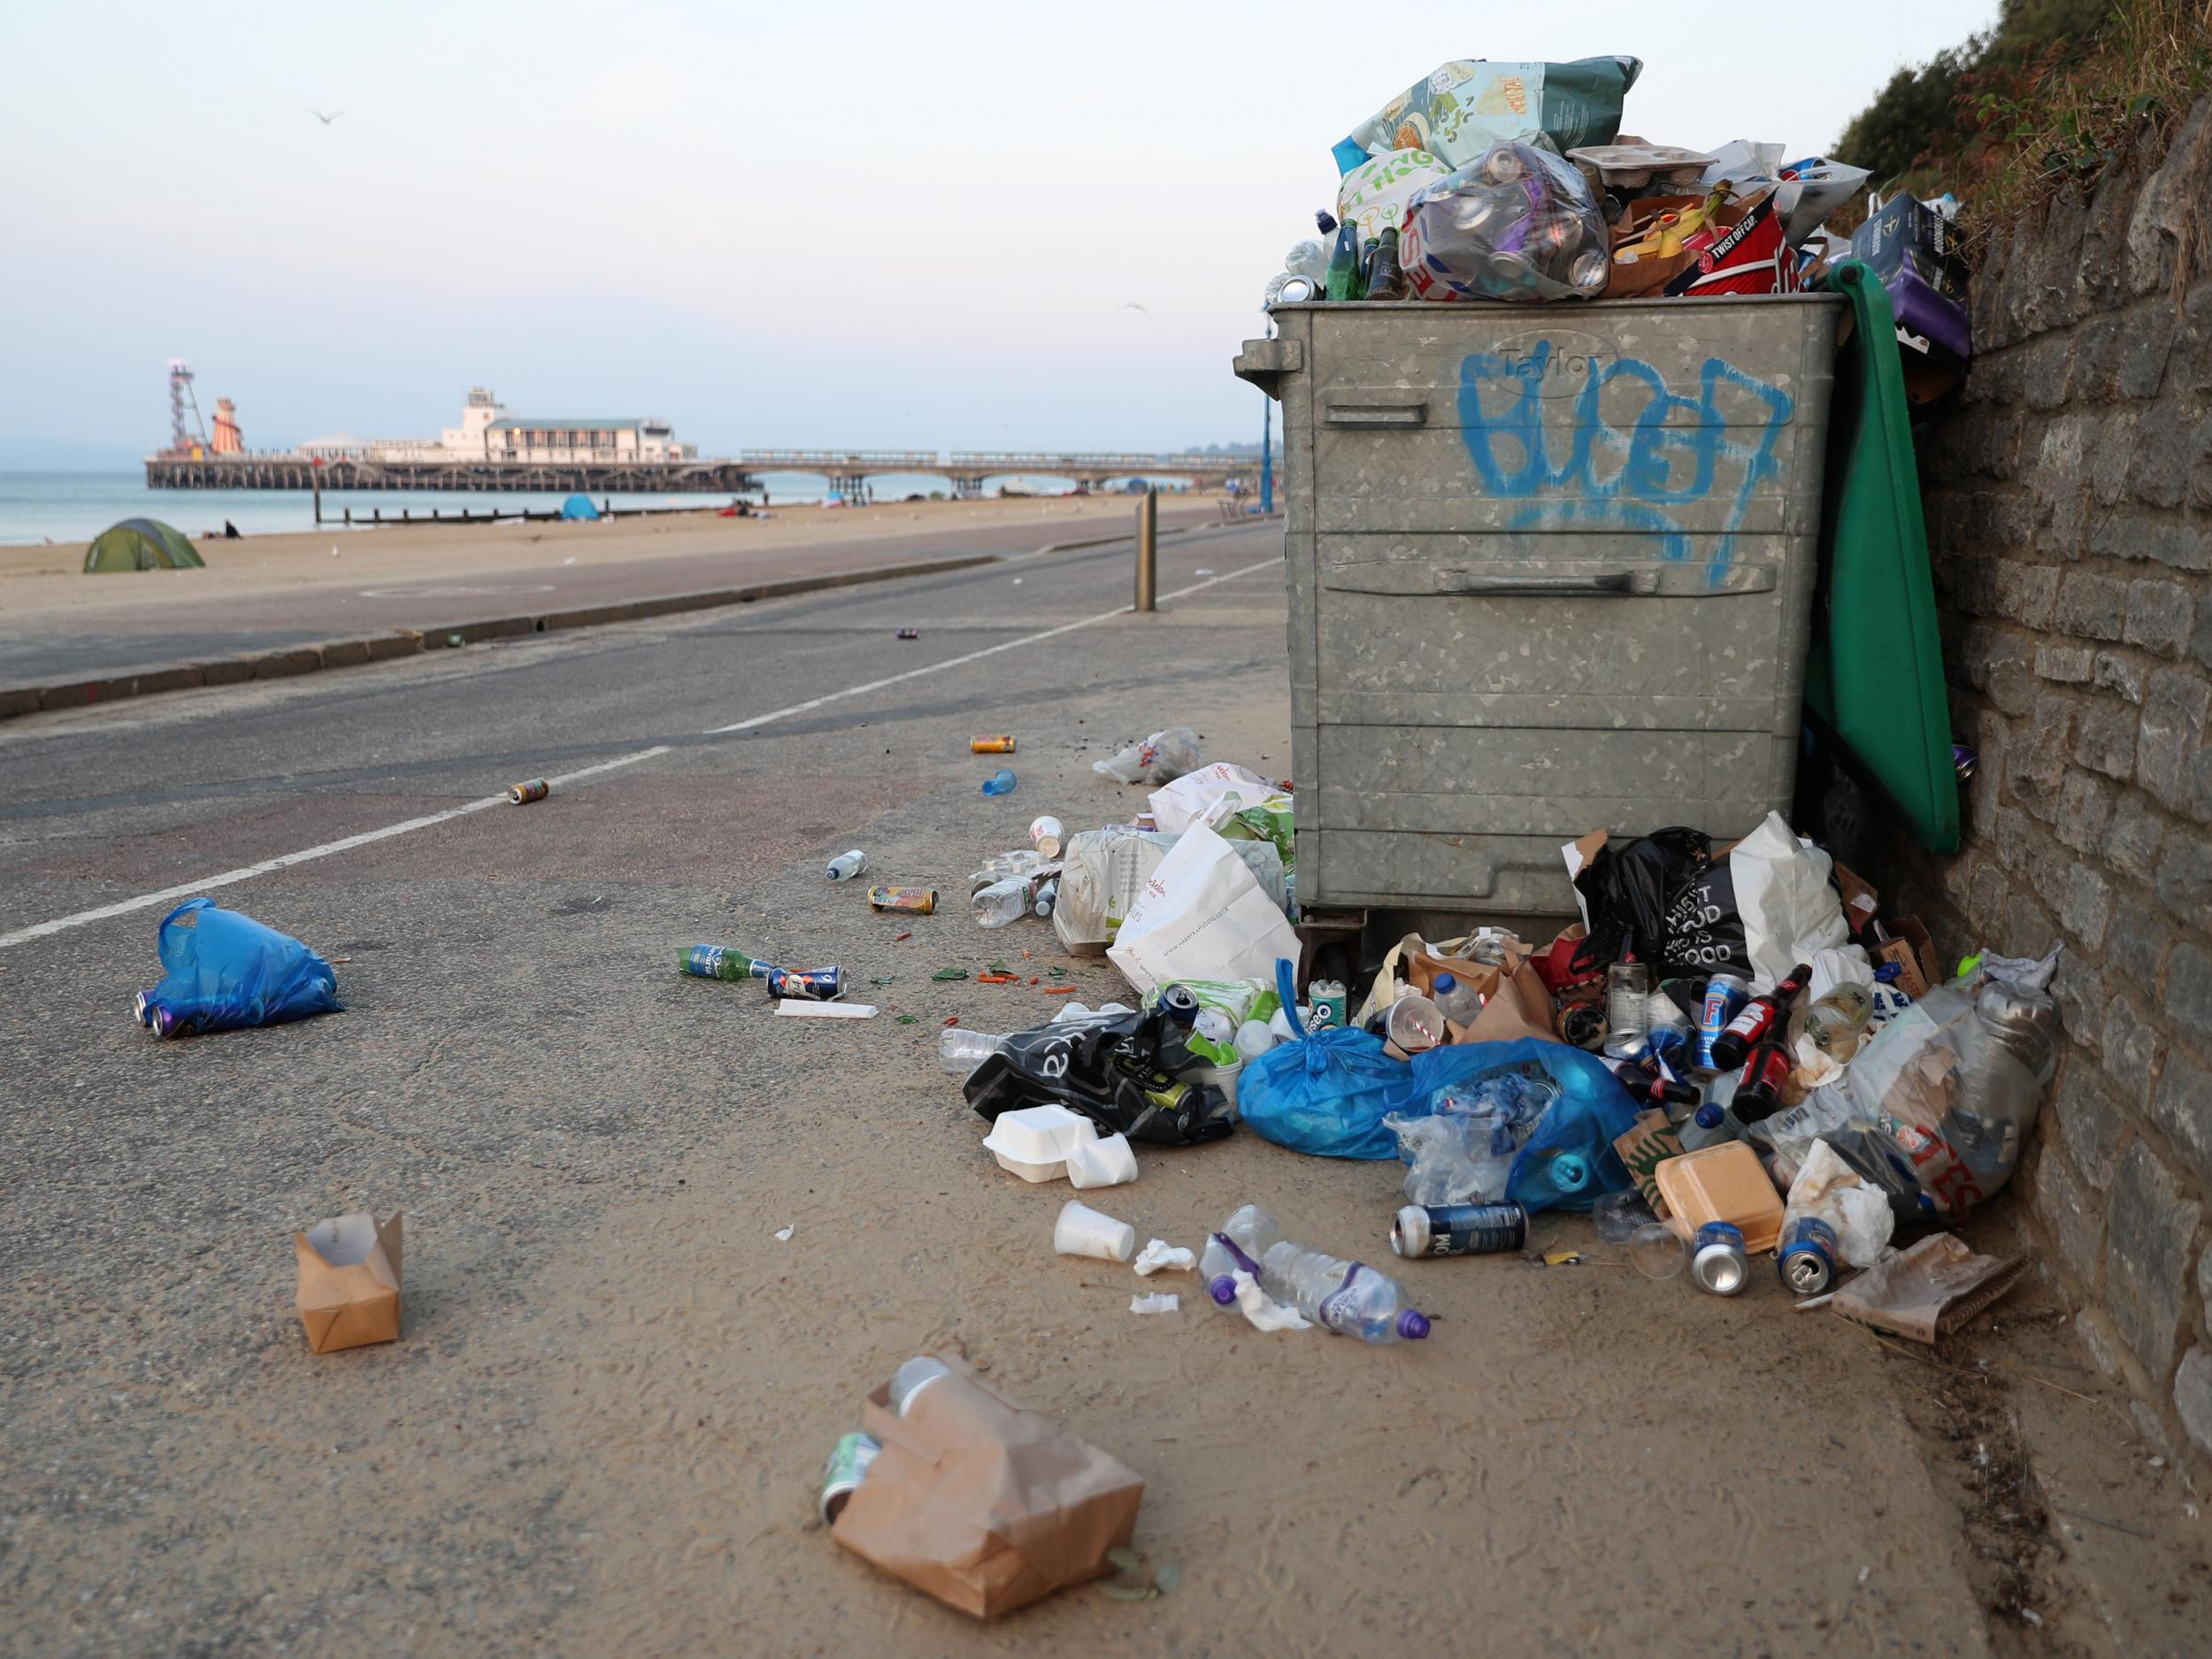 Locals have been left furious after visitors to the beaches dumped rubbish